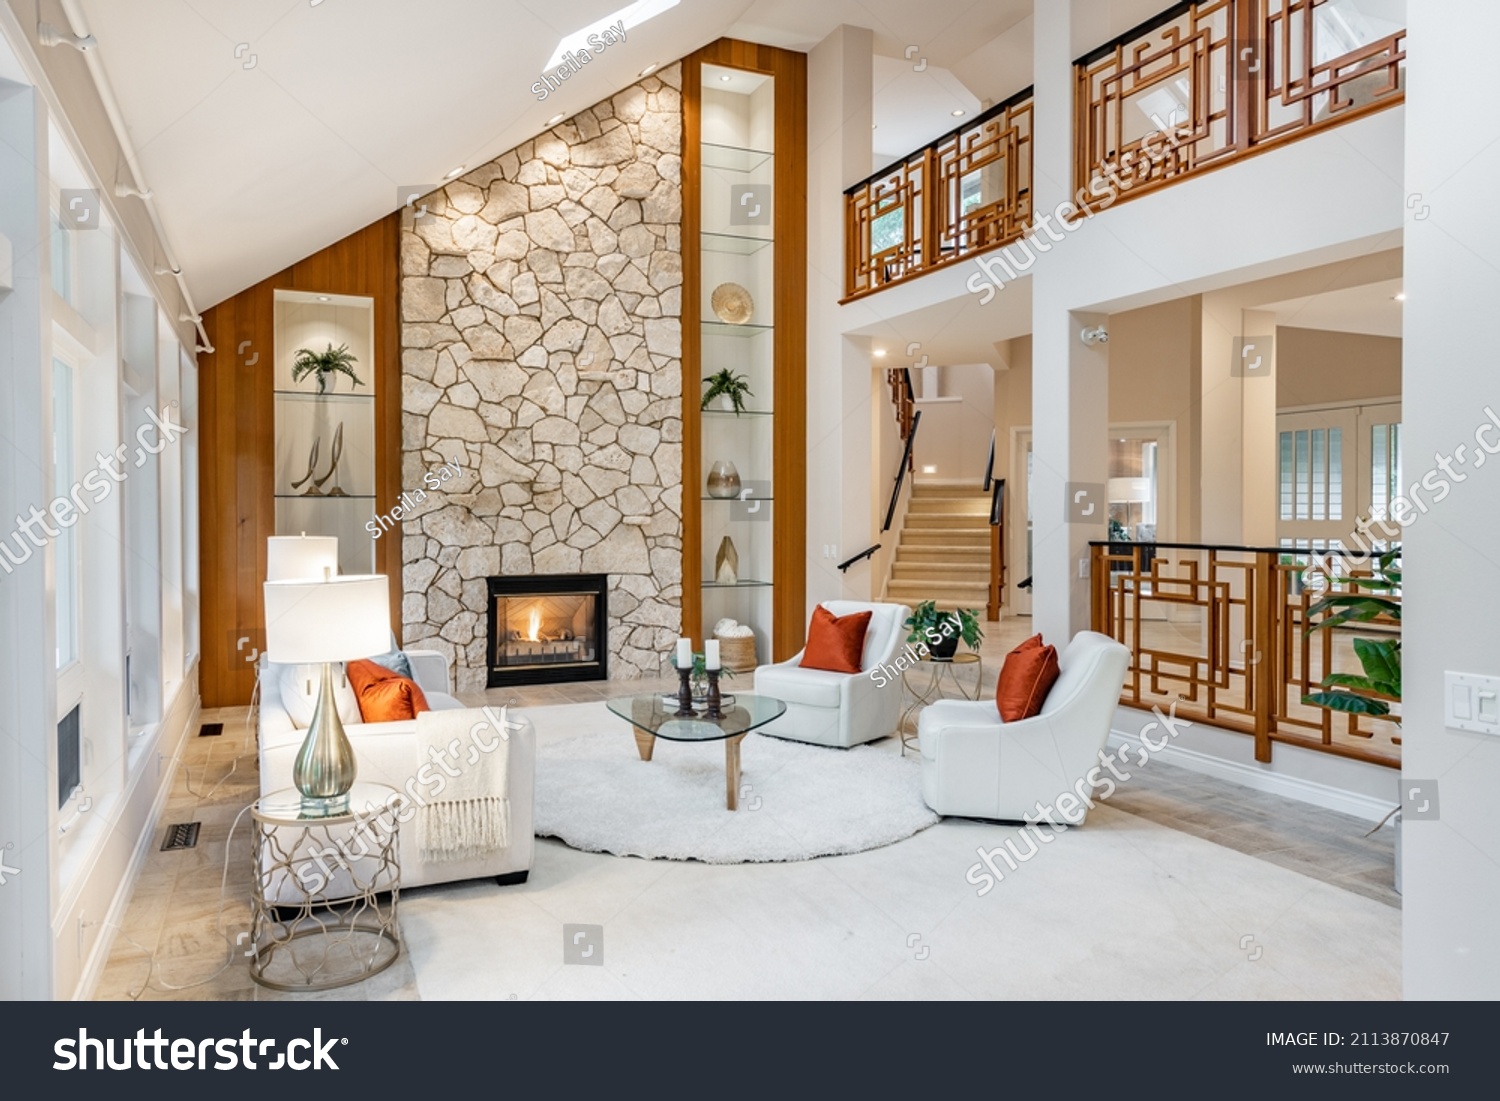 Mid century craftsman house interior living room foyer home office with wood panel walls staircase creative wooden railings stone fireplace in warm white tones and orange accent colors #2113870847